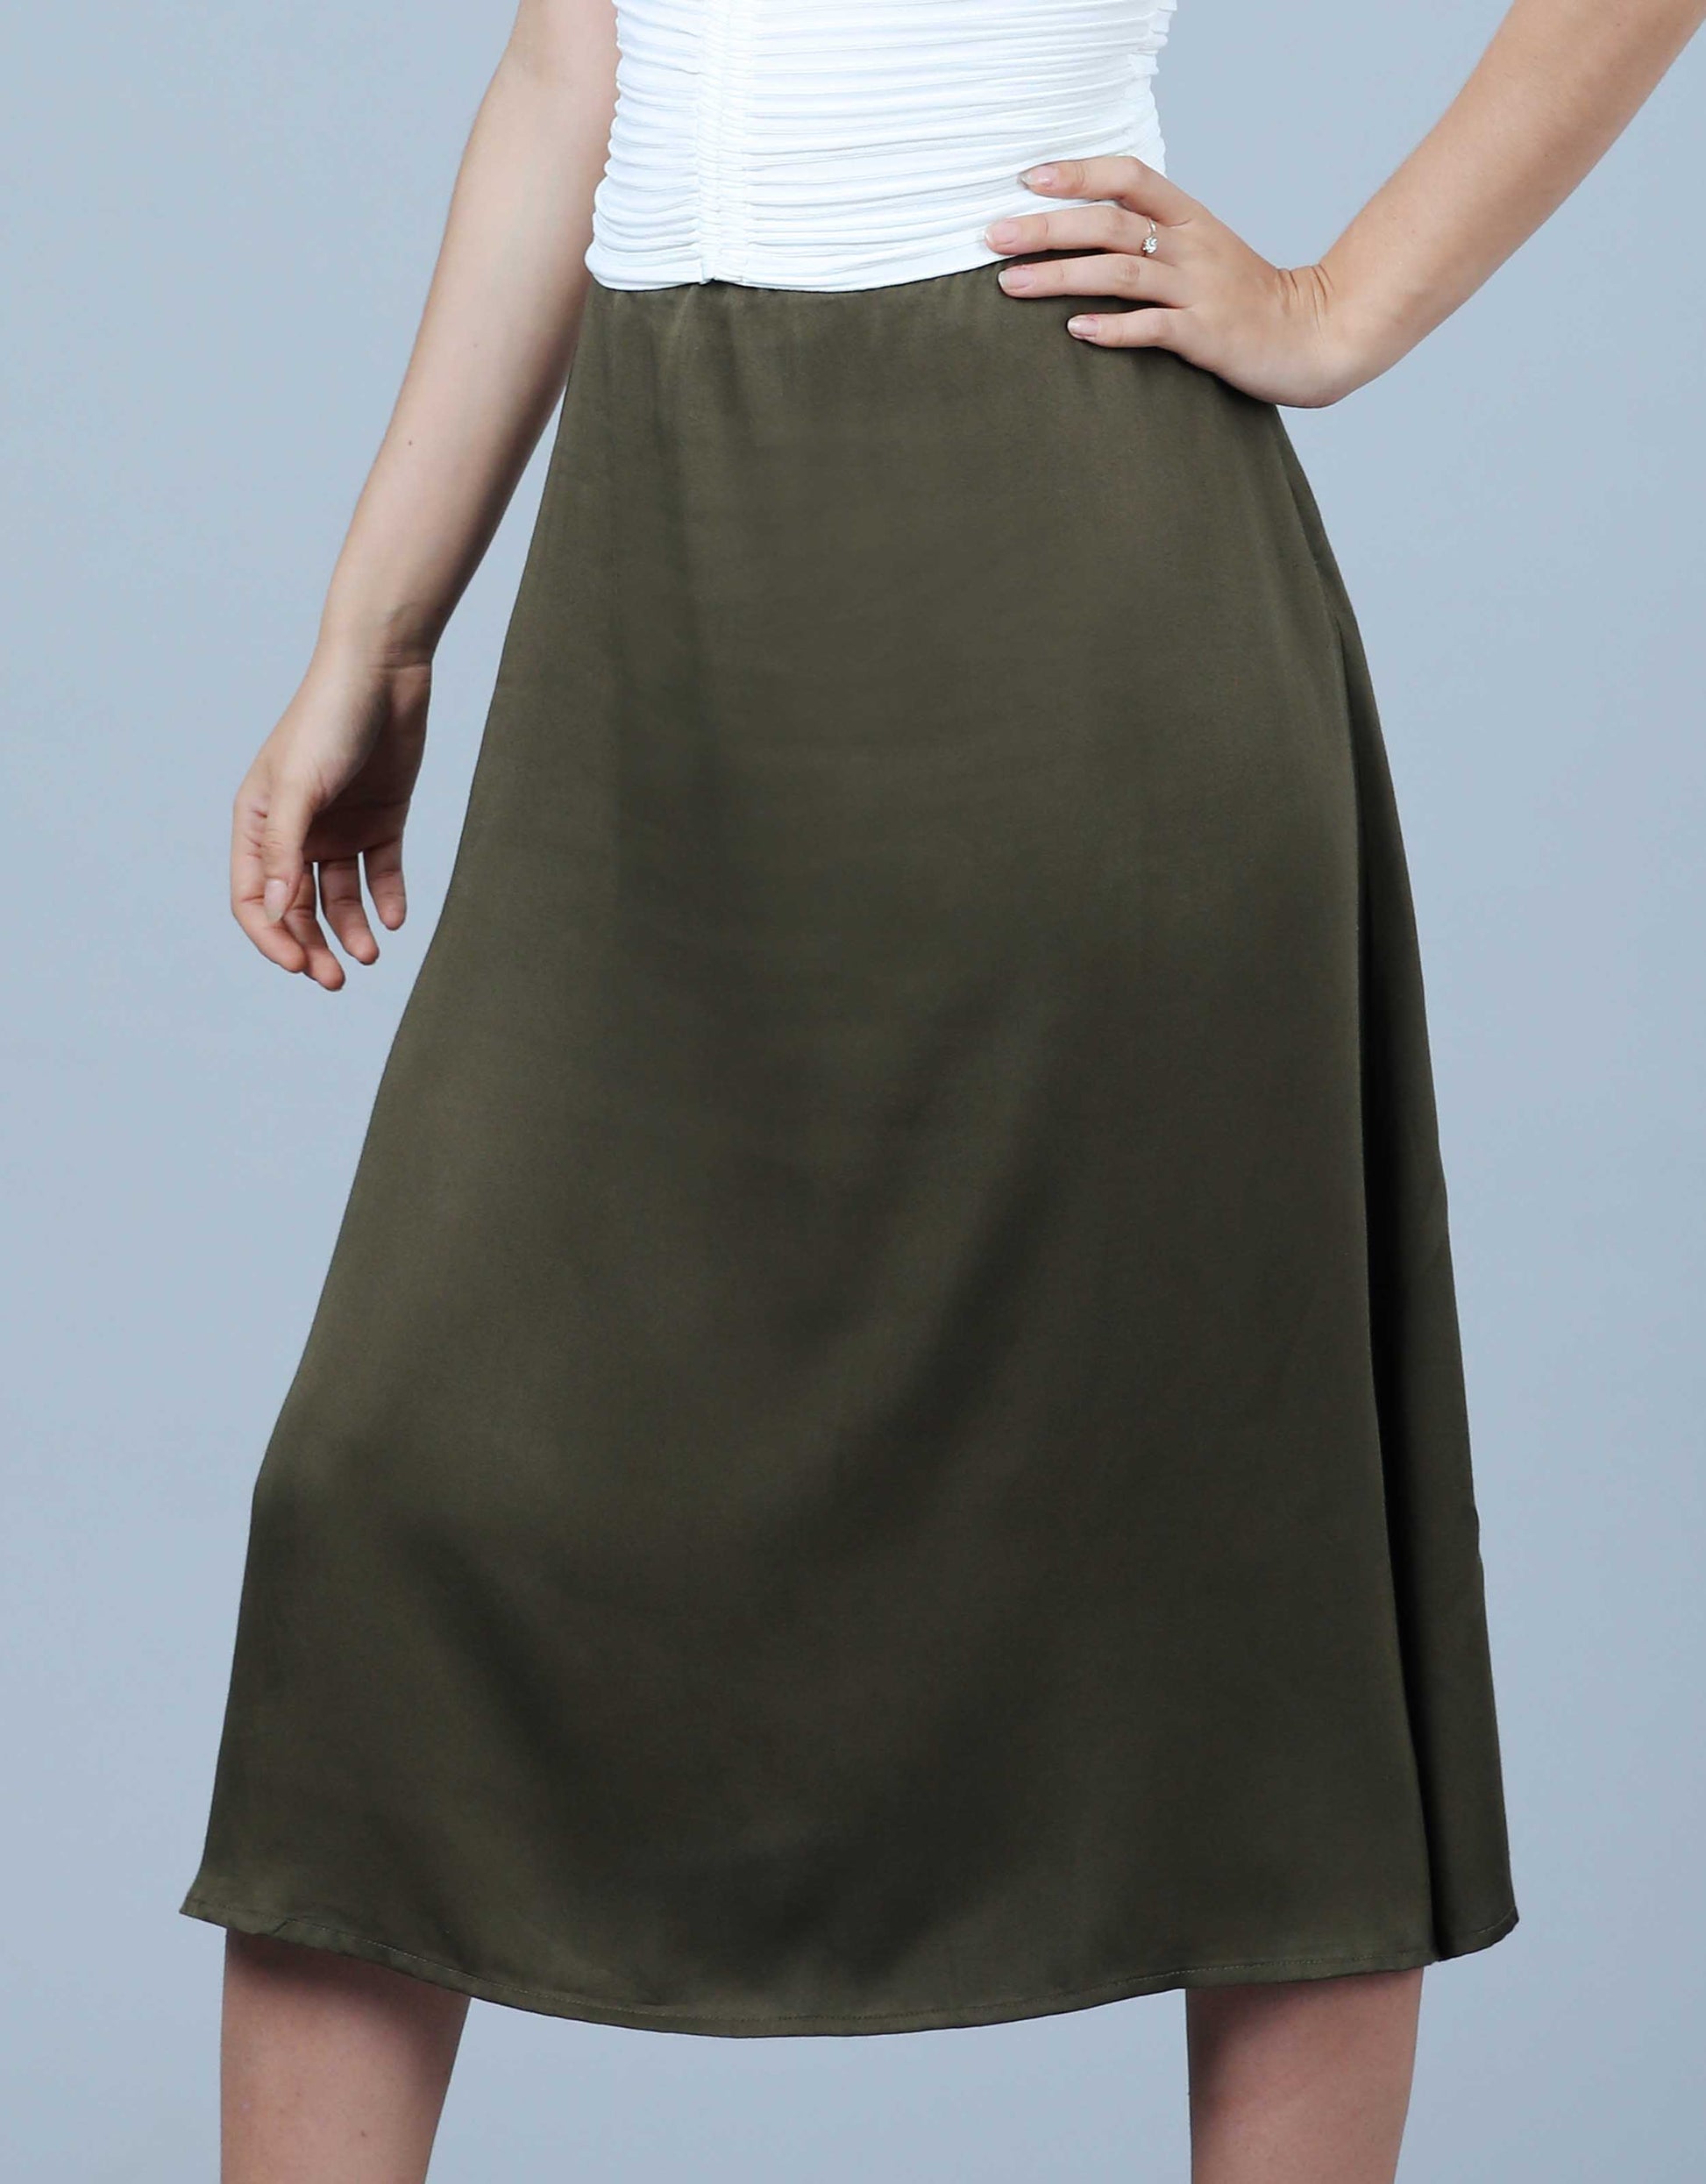 Front closeup view of Hueloom's skirt from gold 'n green capsule.